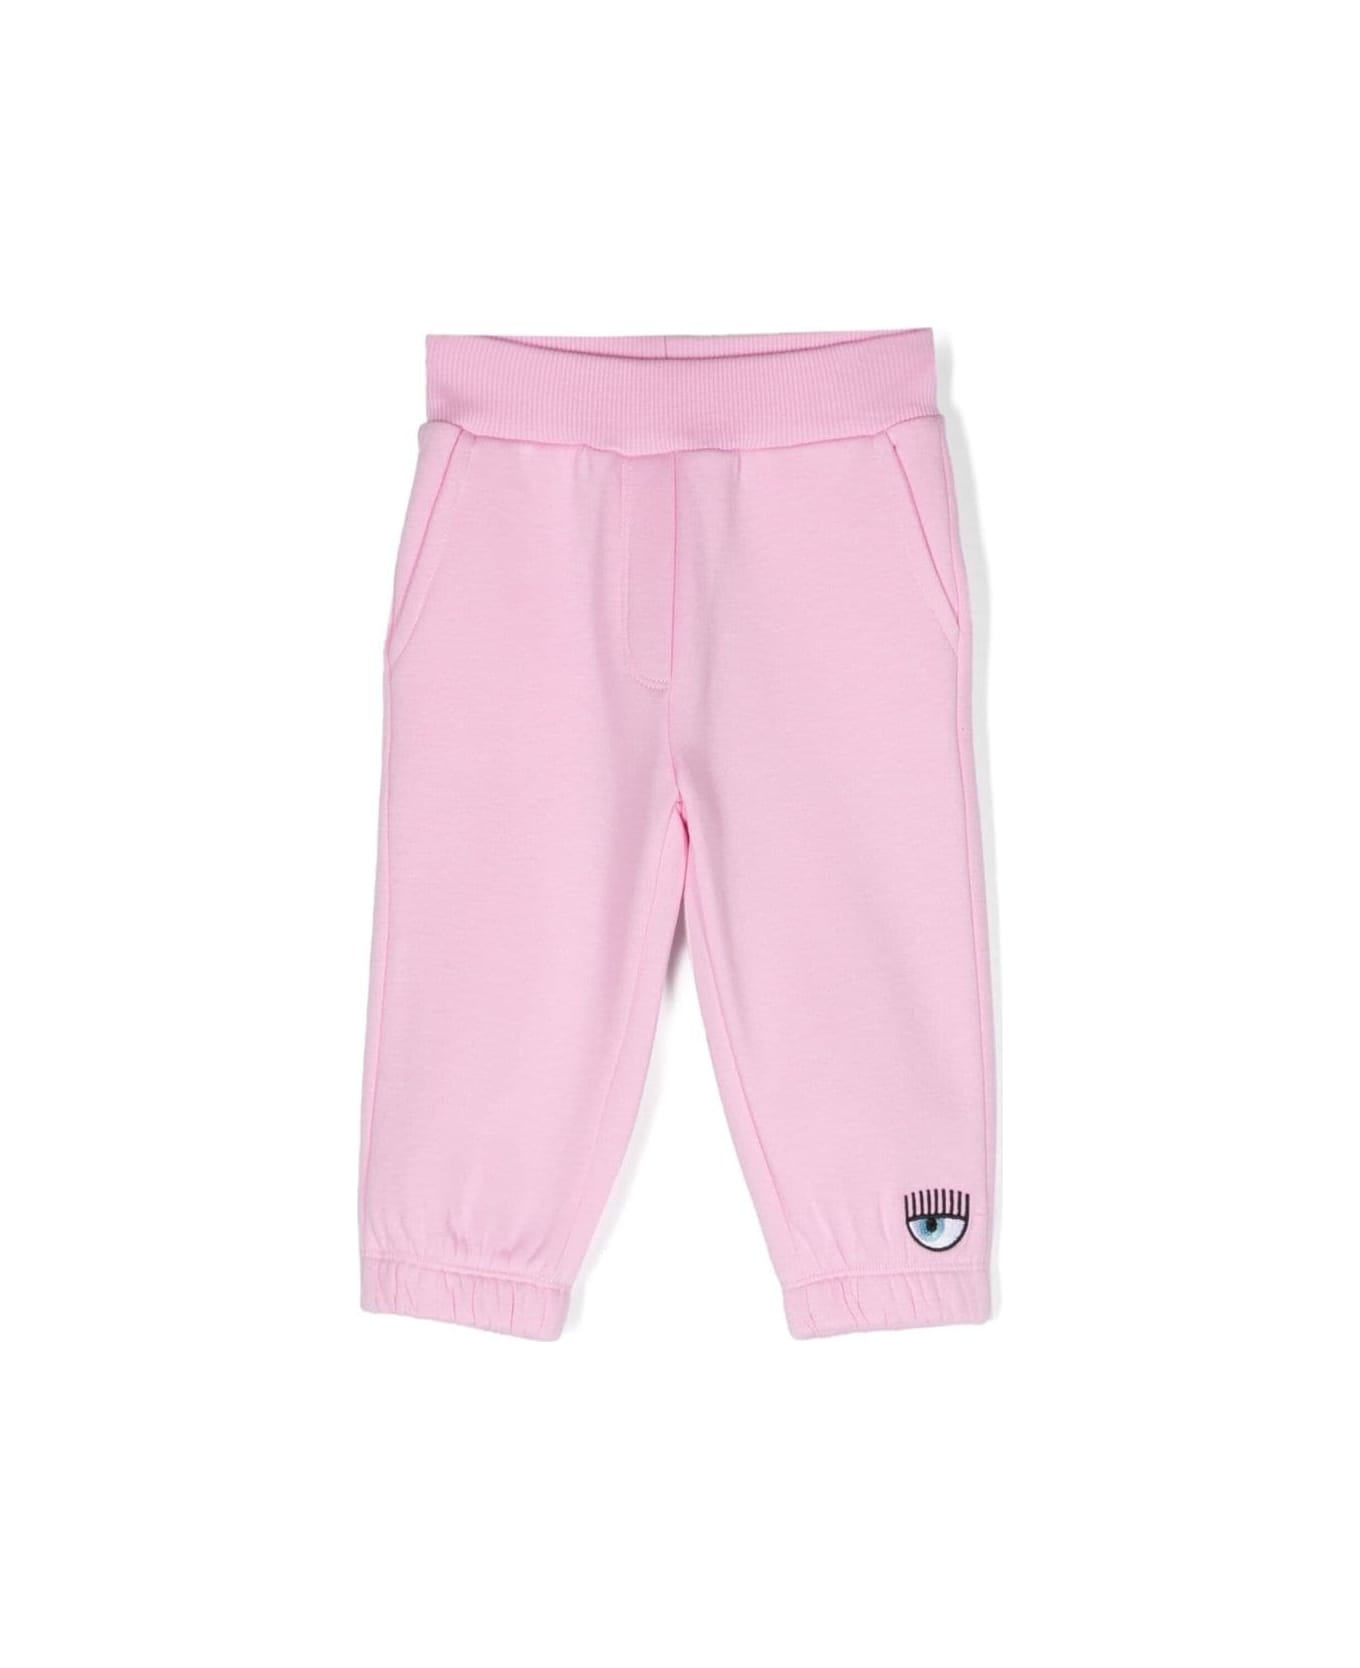 Chiara Ferragni Pink Jogger Pants With Logo Patch In Cotton Blend Baby - Pink